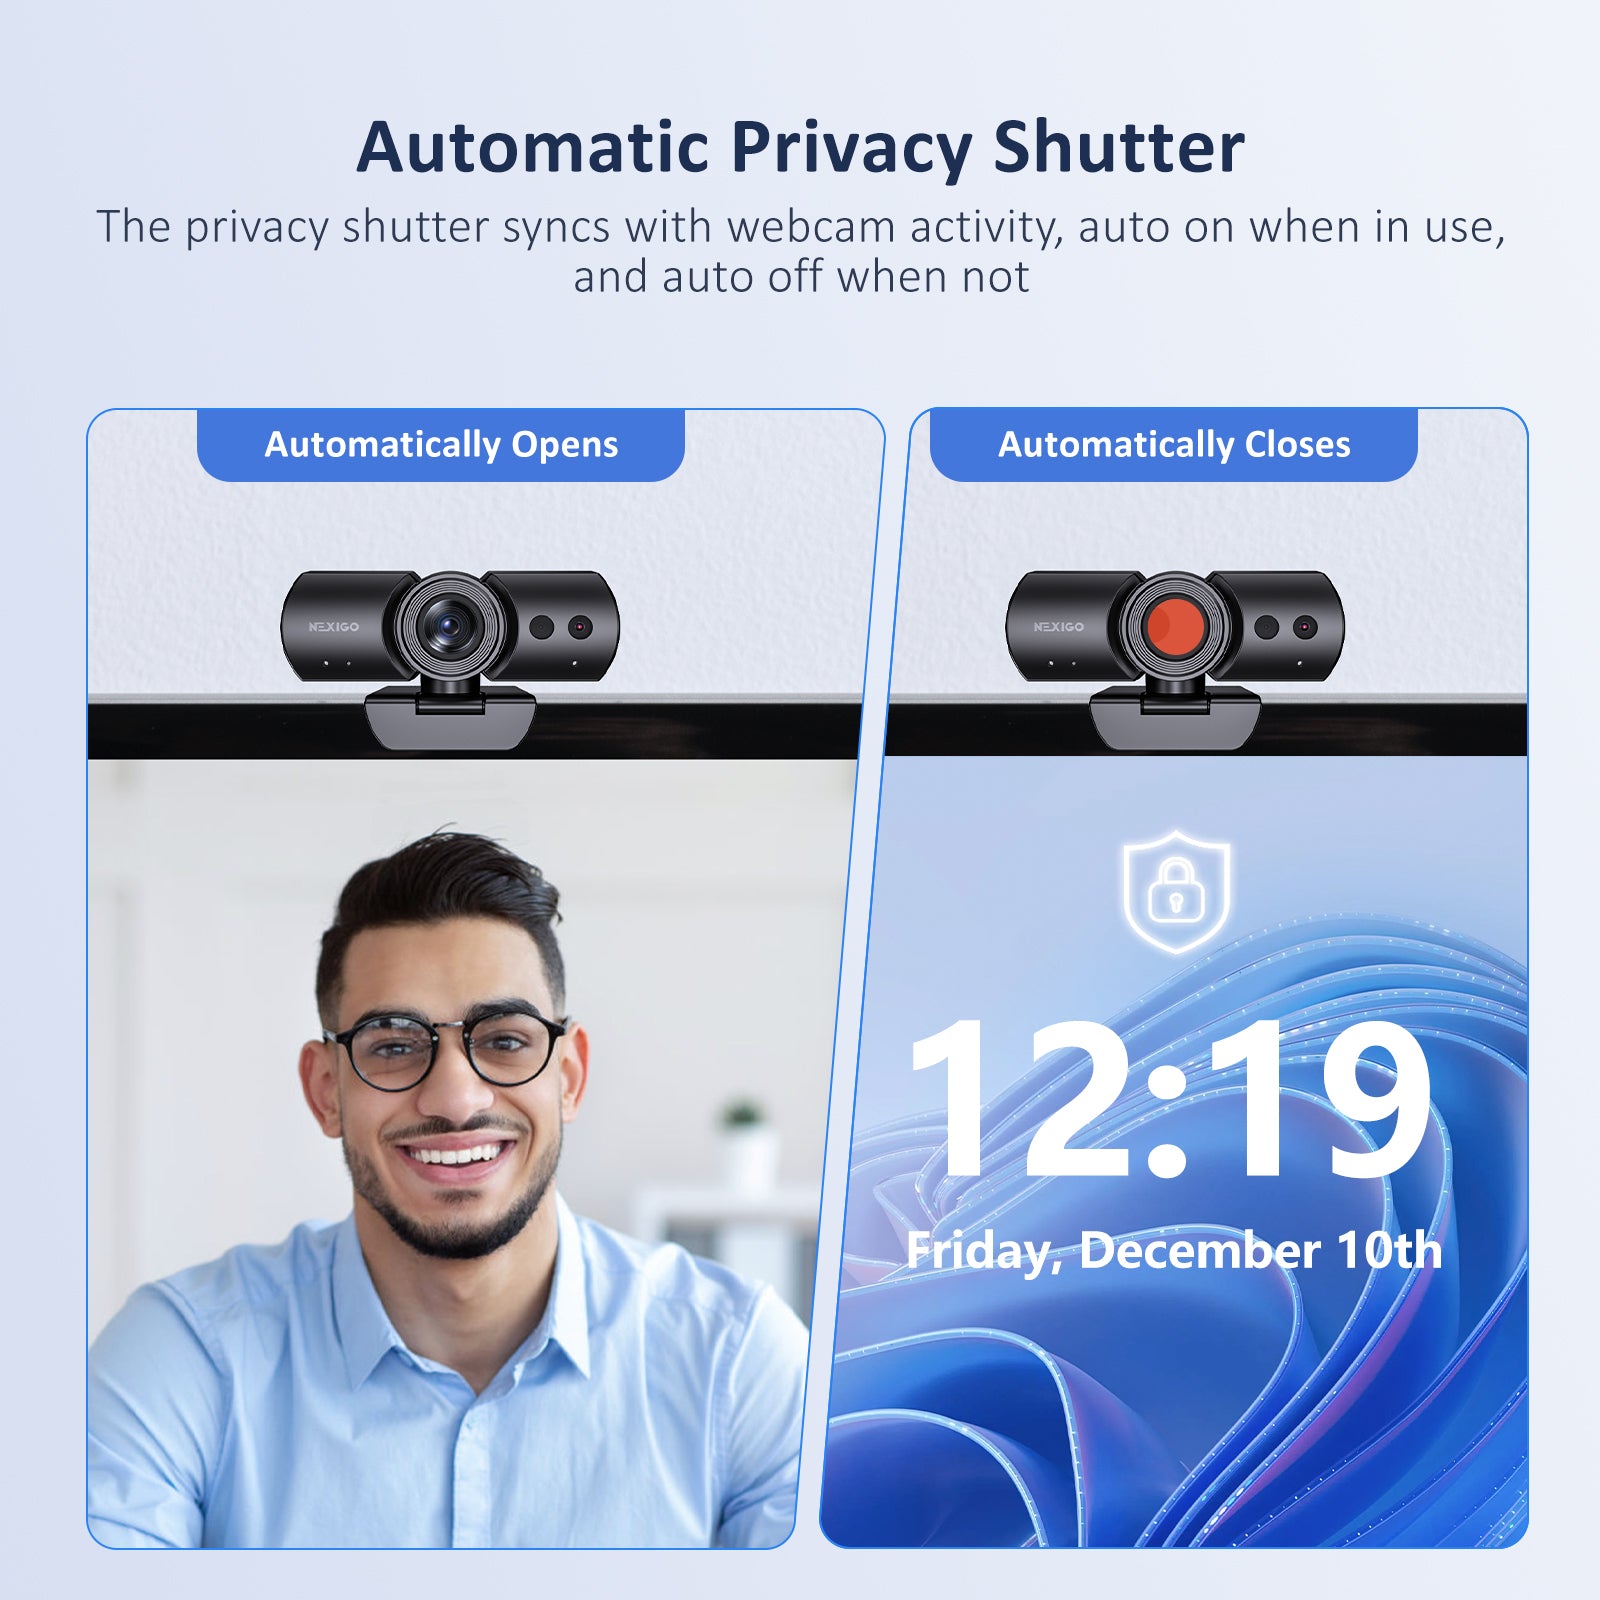 Webcam's privacy shutter auto activates during use, off when not.